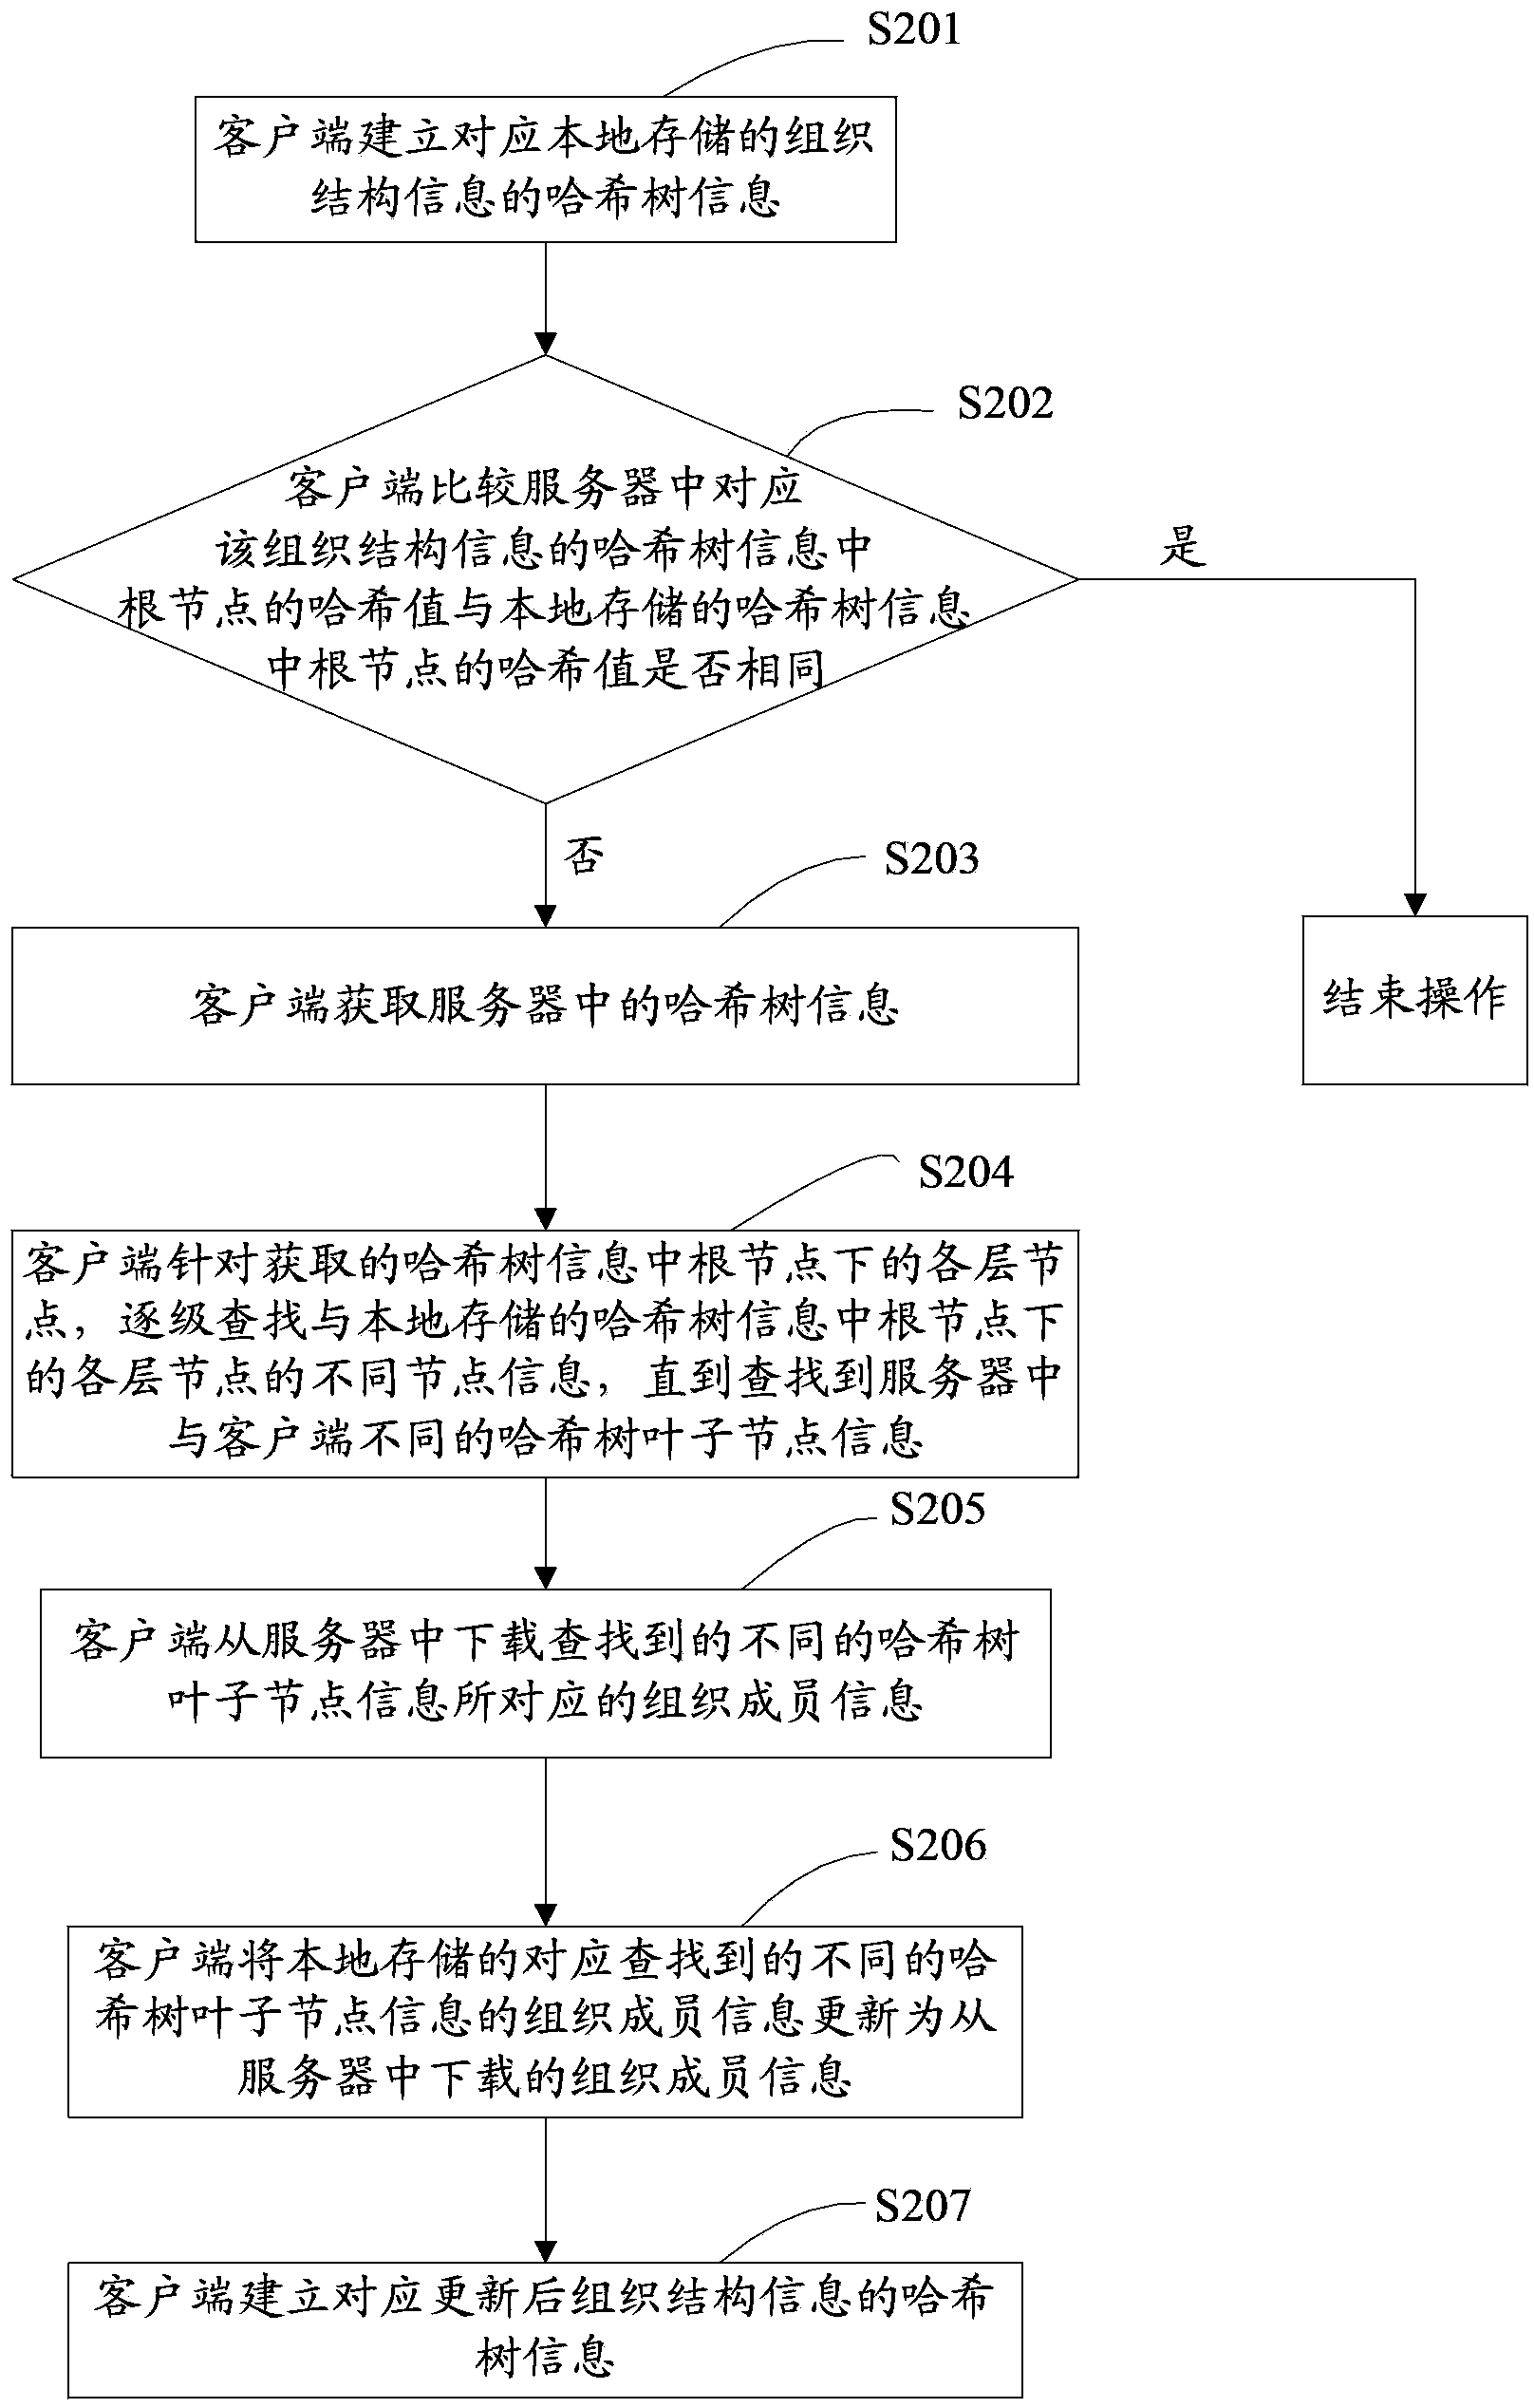 Method and device for maintaining organization structure information